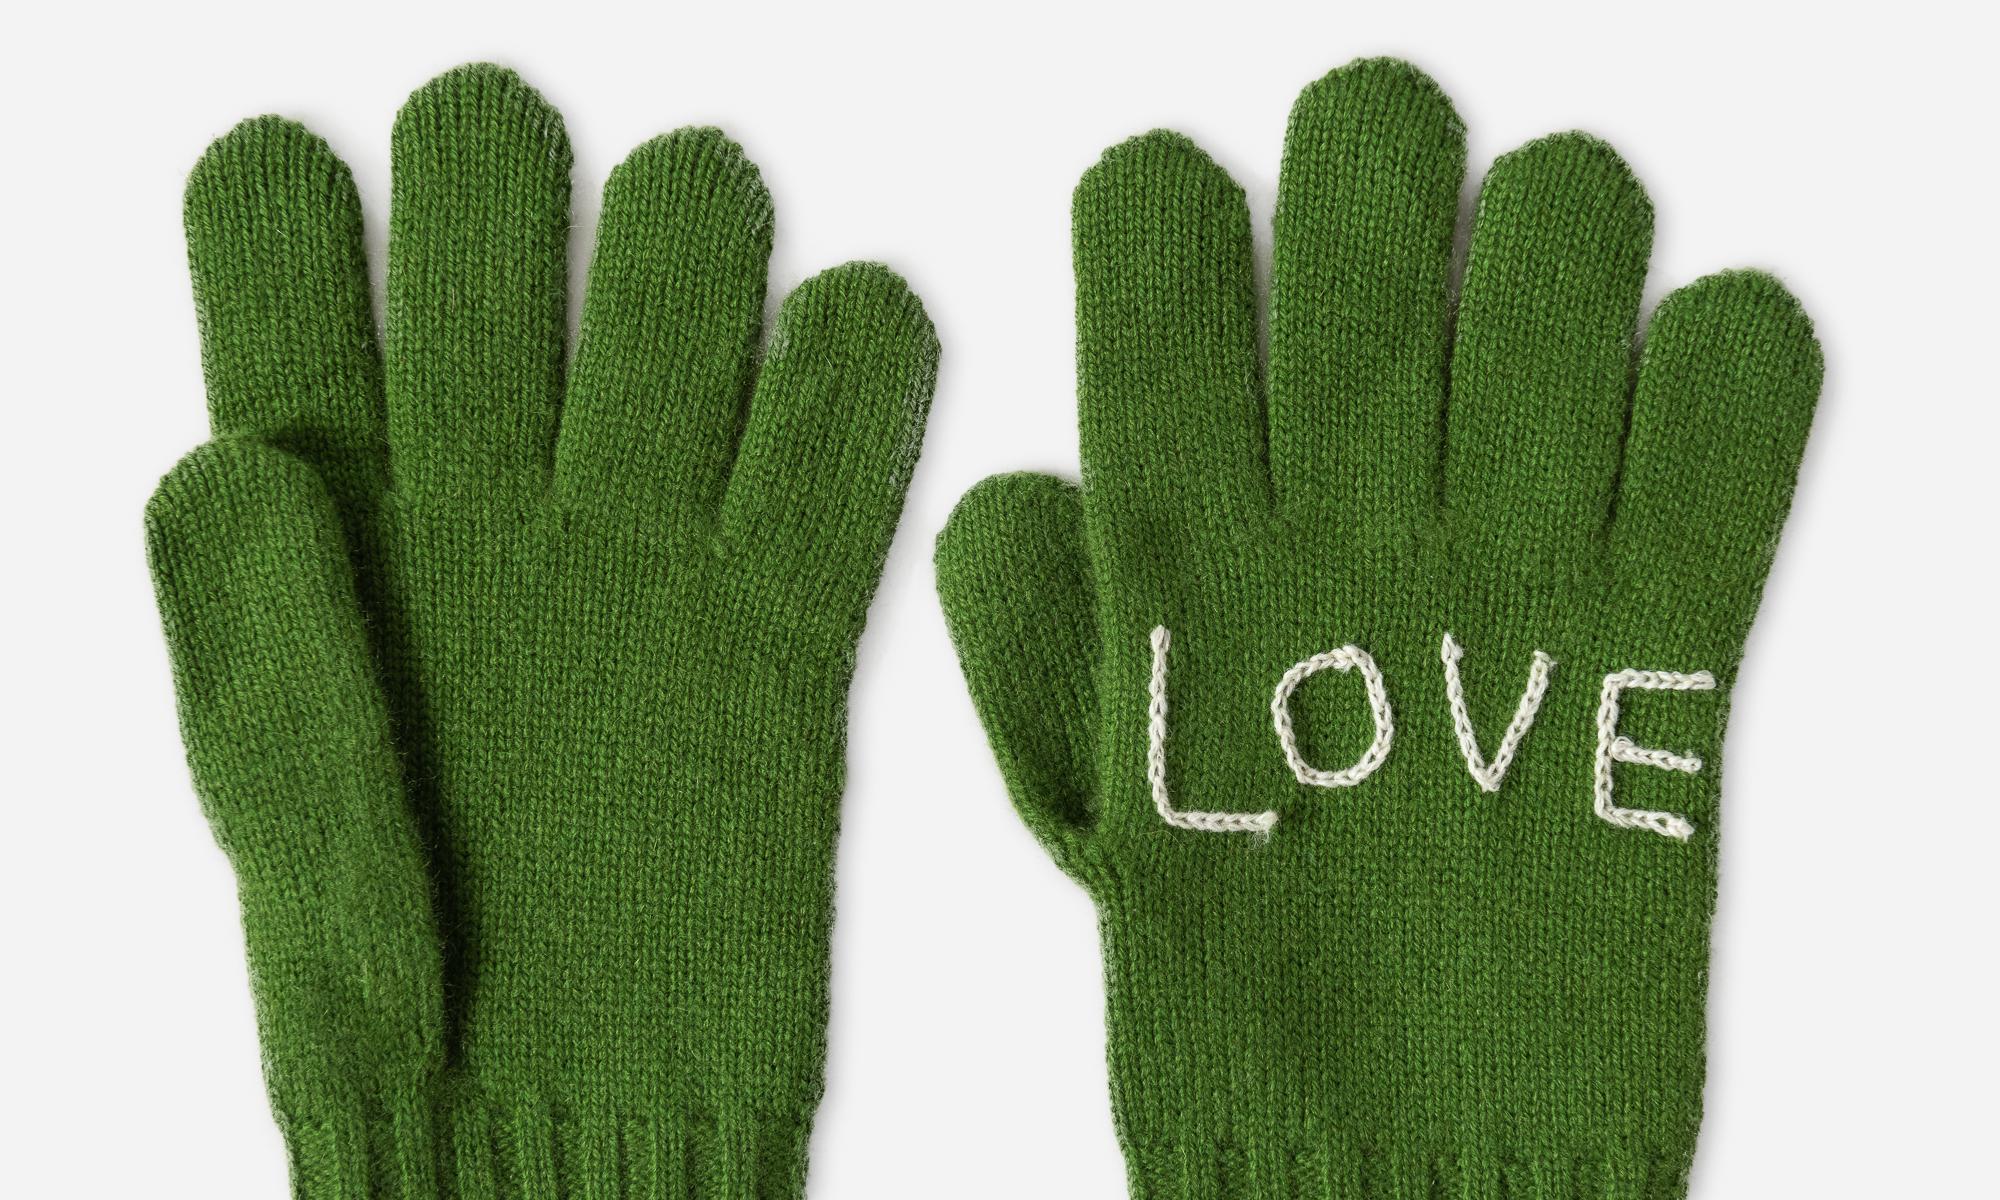 Mongolian Hate Love Green Gloves by Saved, New York